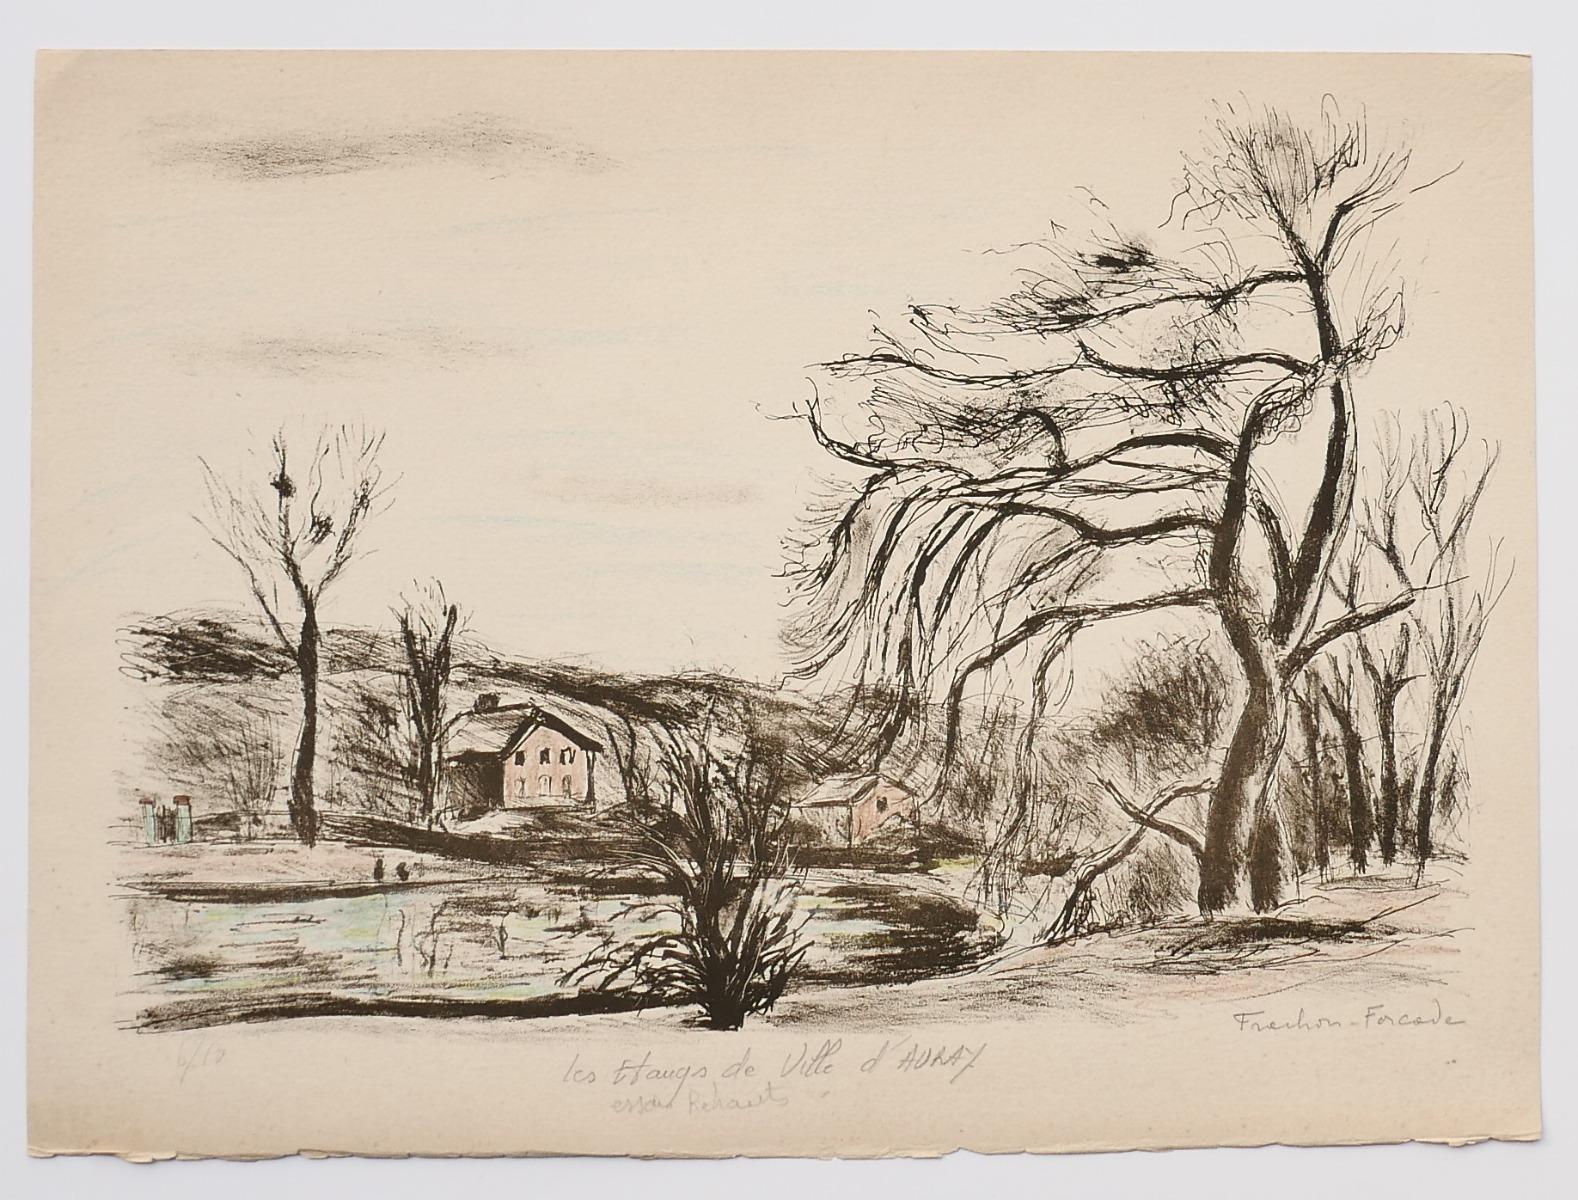 Landscape is an original modern artwork realized by the French artist Pierre Frachon-Forcade in the middle of the XX Century. 

Original Lithograph on paper. 

Hand-signed by the artist on the lower right corner in pencil.

Numbered in pencil on the